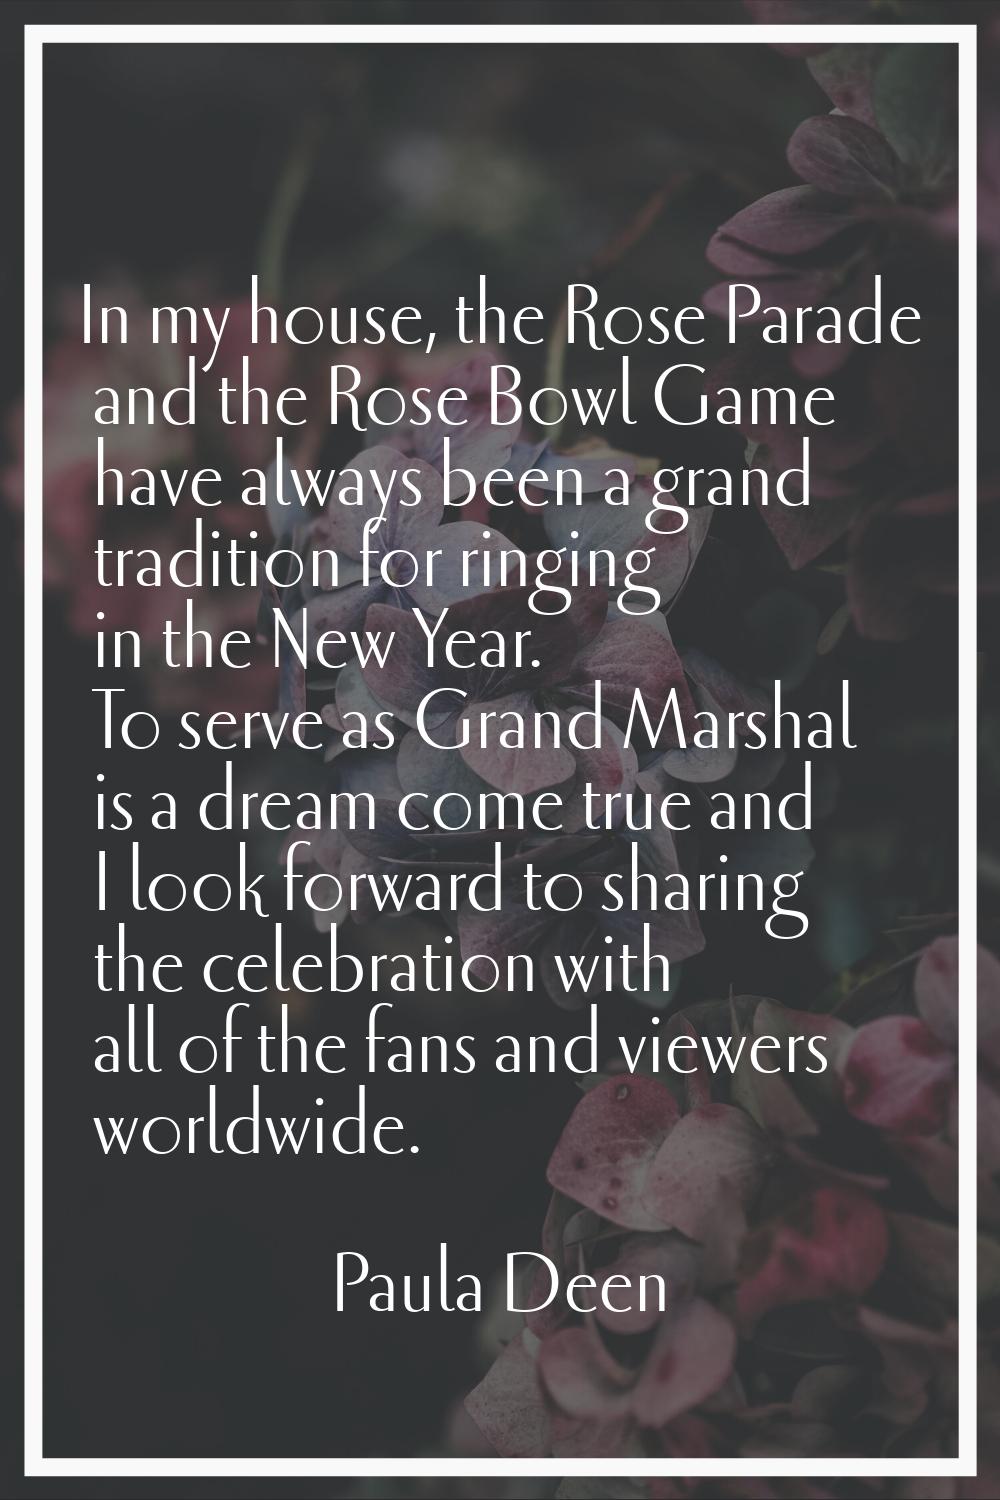 In my house, the Rose Parade and the Rose Bowl Game have always been a grand tradition for ringing 